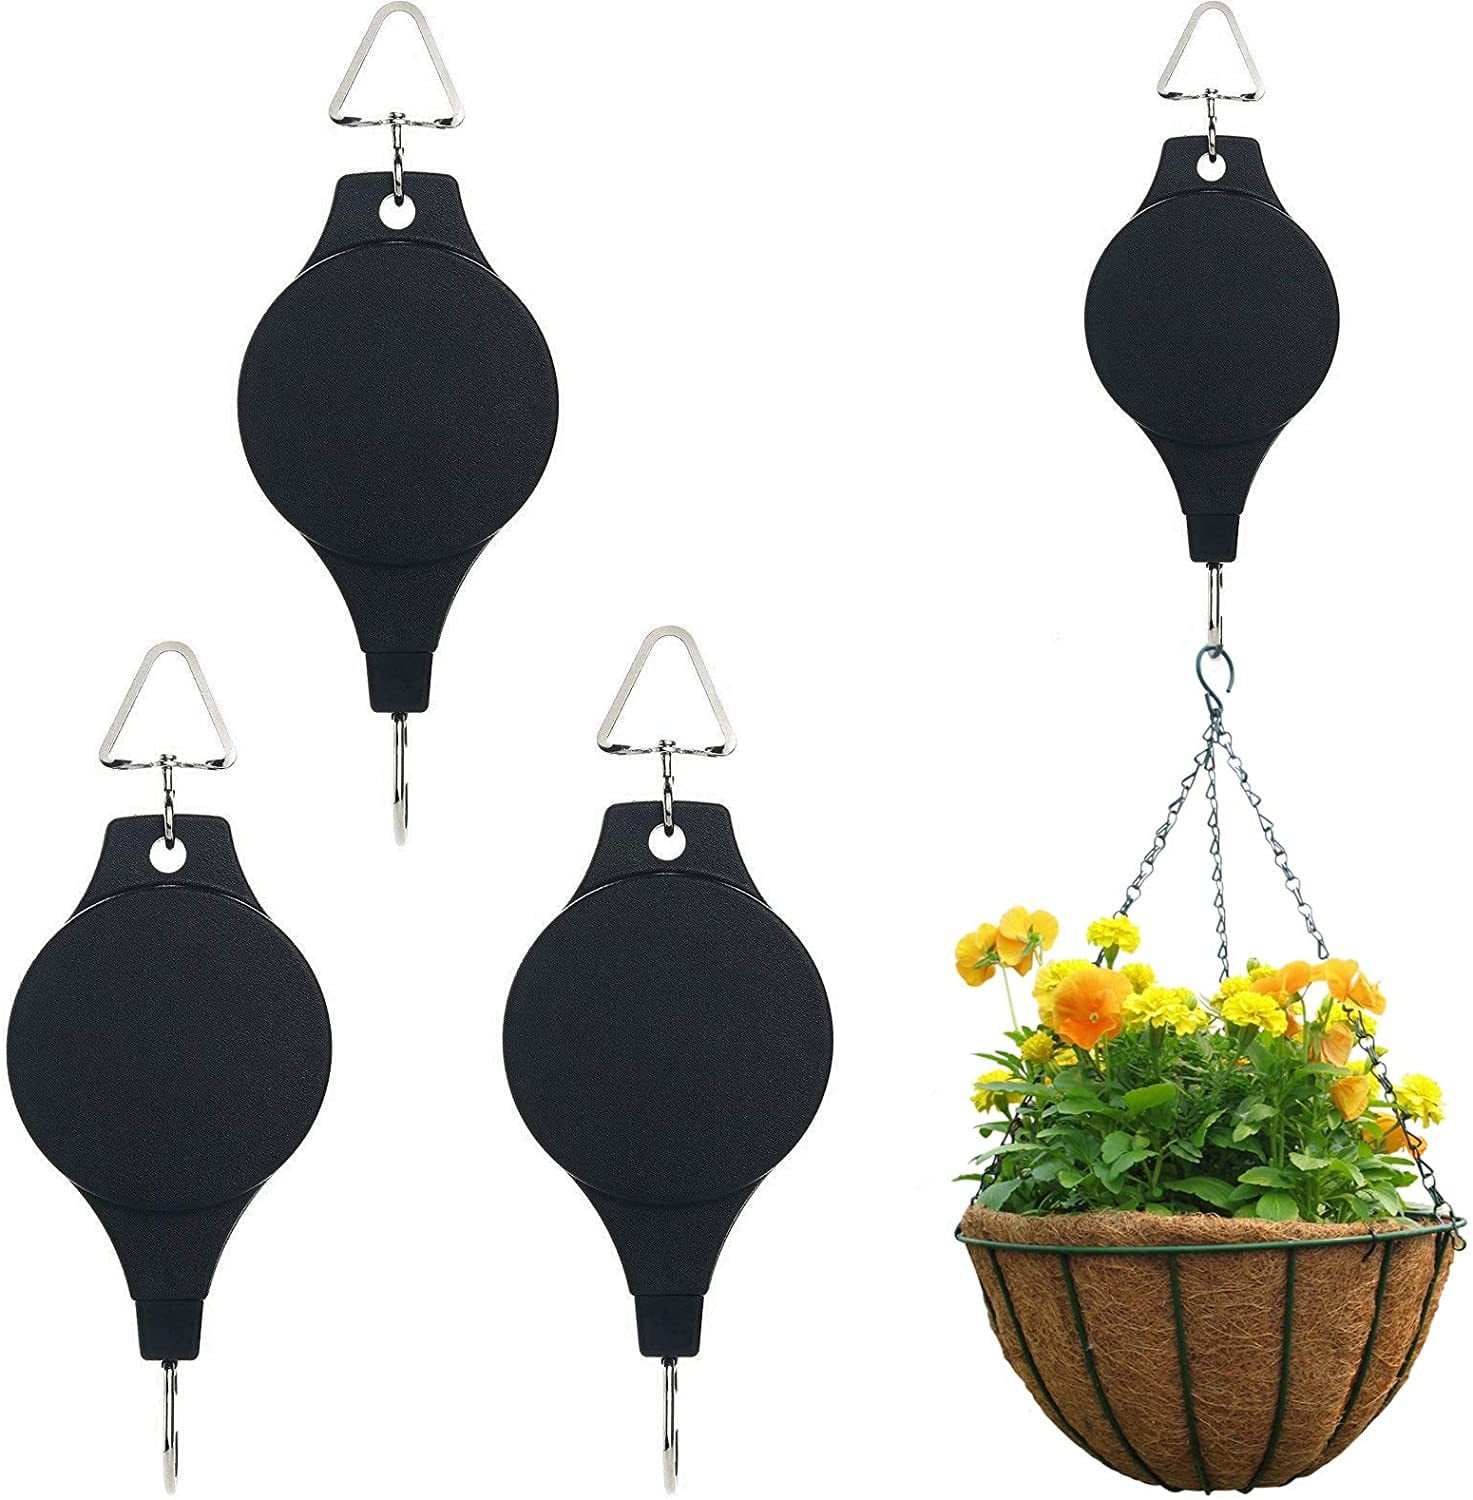 Heavy Duty Adjustable Plant Pulley Retractable Pulley Plant Hanger Hanging  Flower Basket Hook Hanger for Garden Baskets Pots Pack of 3 Pieces 